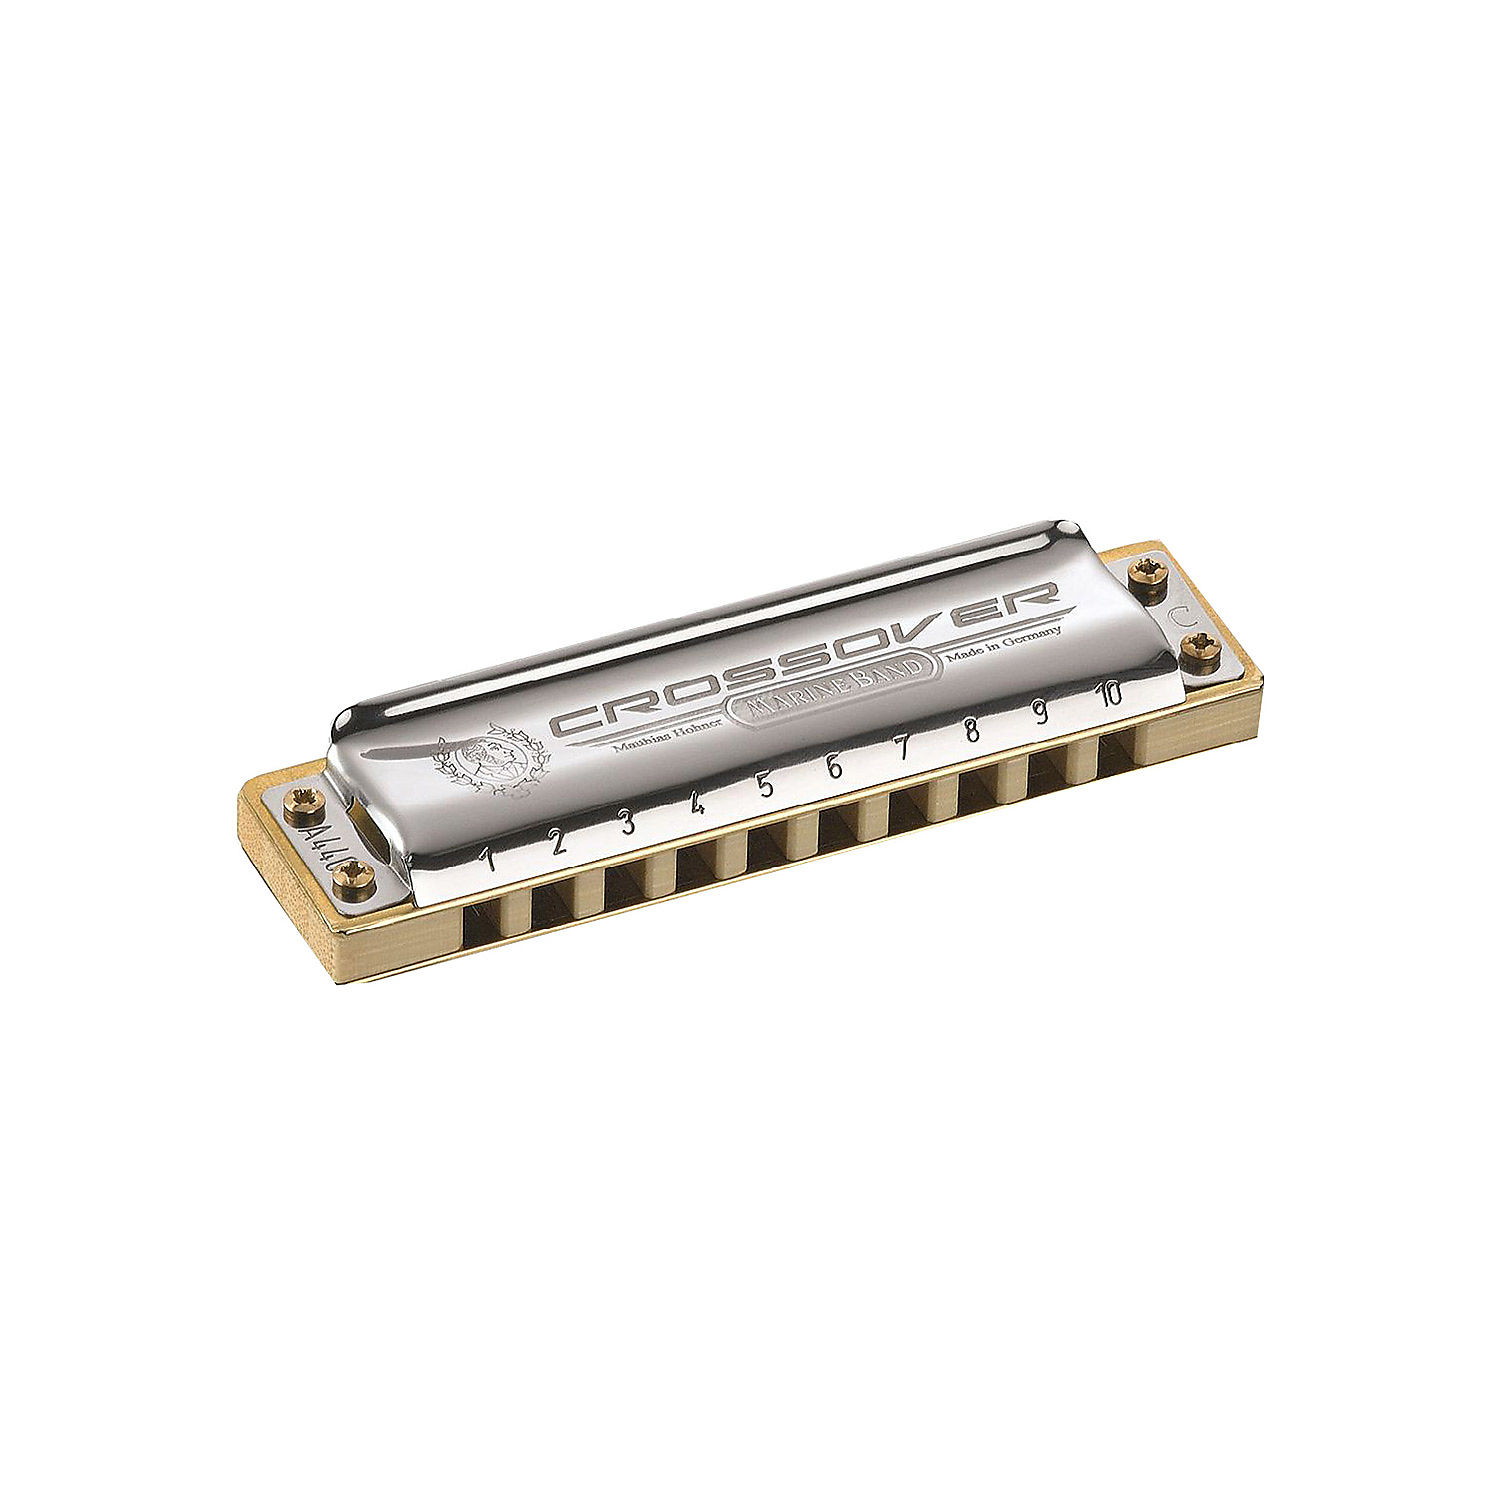 Hohner M2009BX-A Marine Band Crossover Harmonica - Key of A